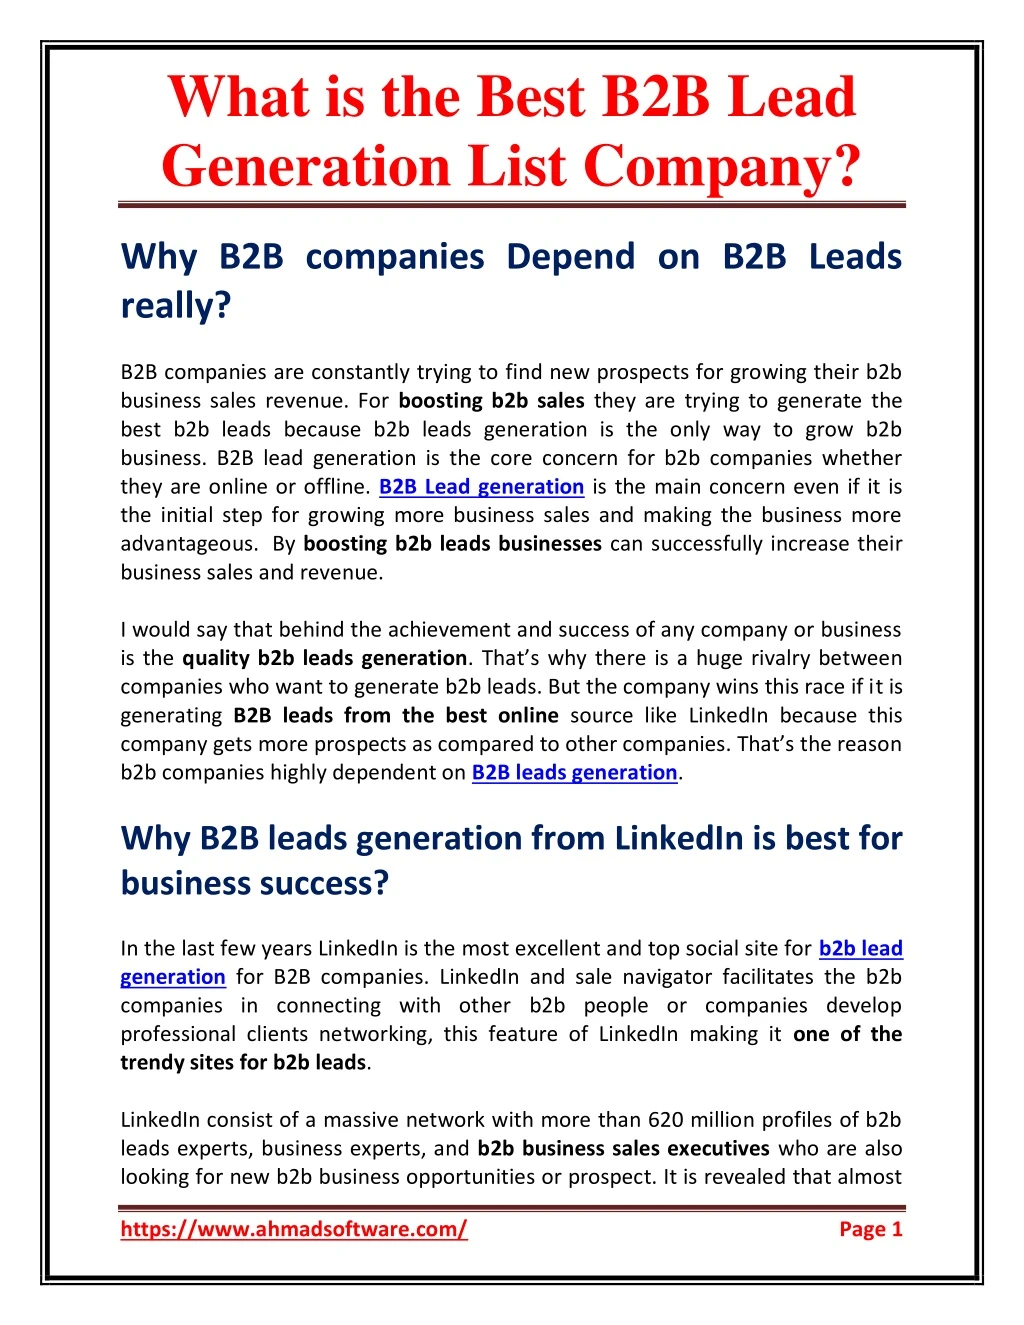 what is the best b2b lead generation list company